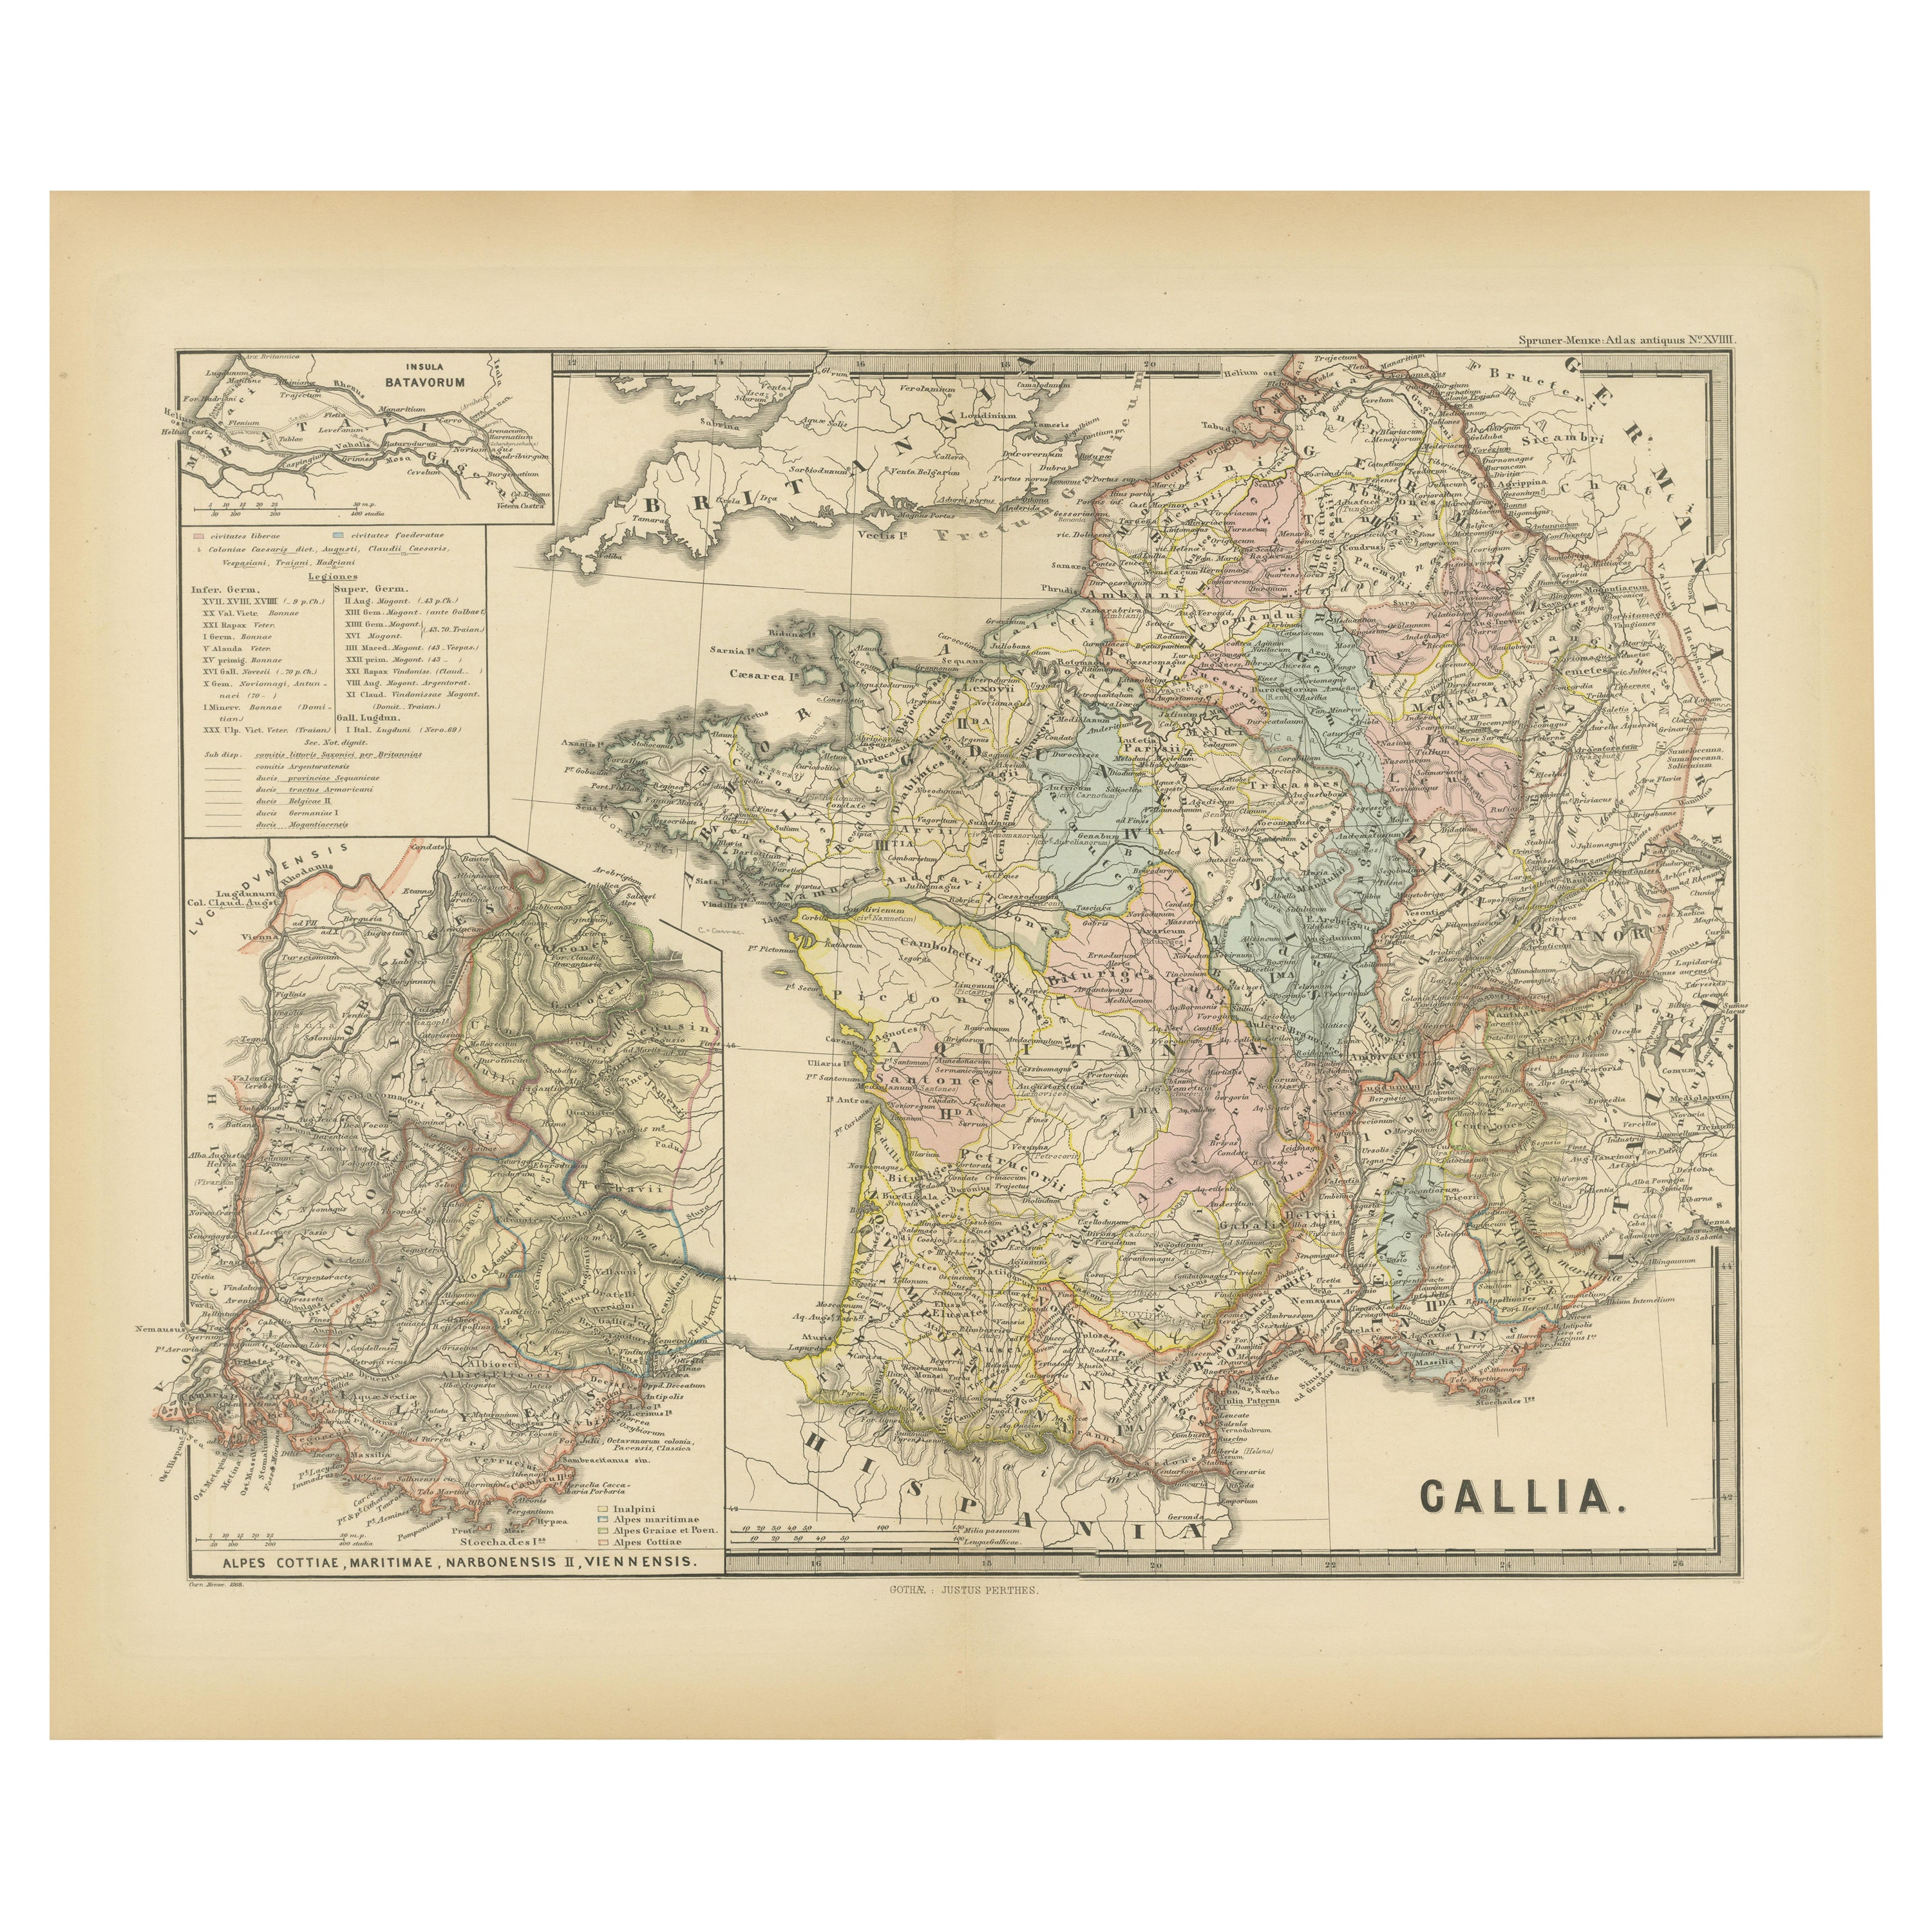 Ancient Gaul: A Cartographic Overview of Gallic Tribes and Roman Provinces, 1880 For Sale